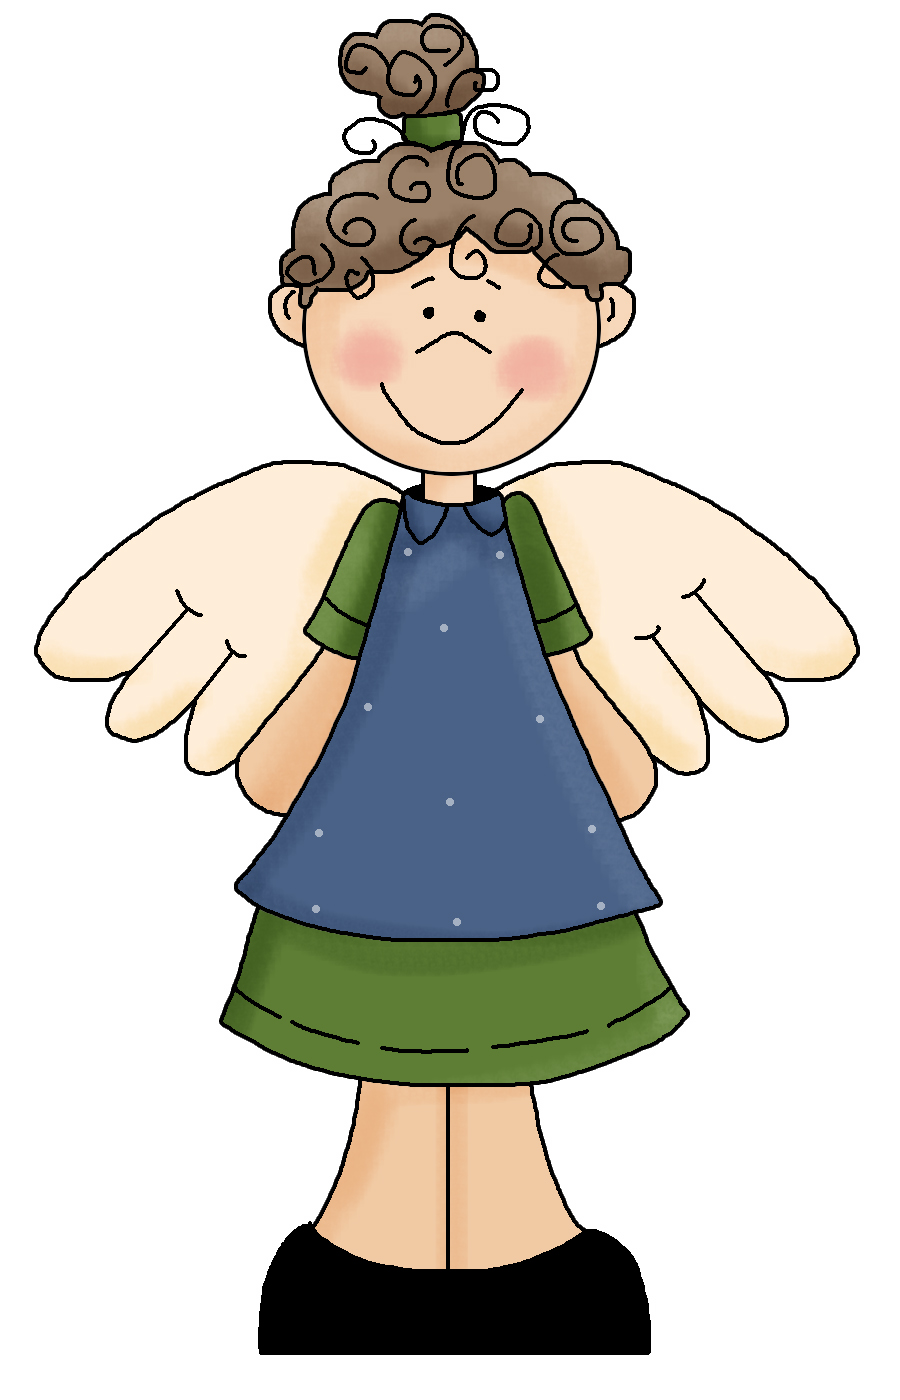 Angel Clip Art Free Cliparts That You Can Download To You Computer